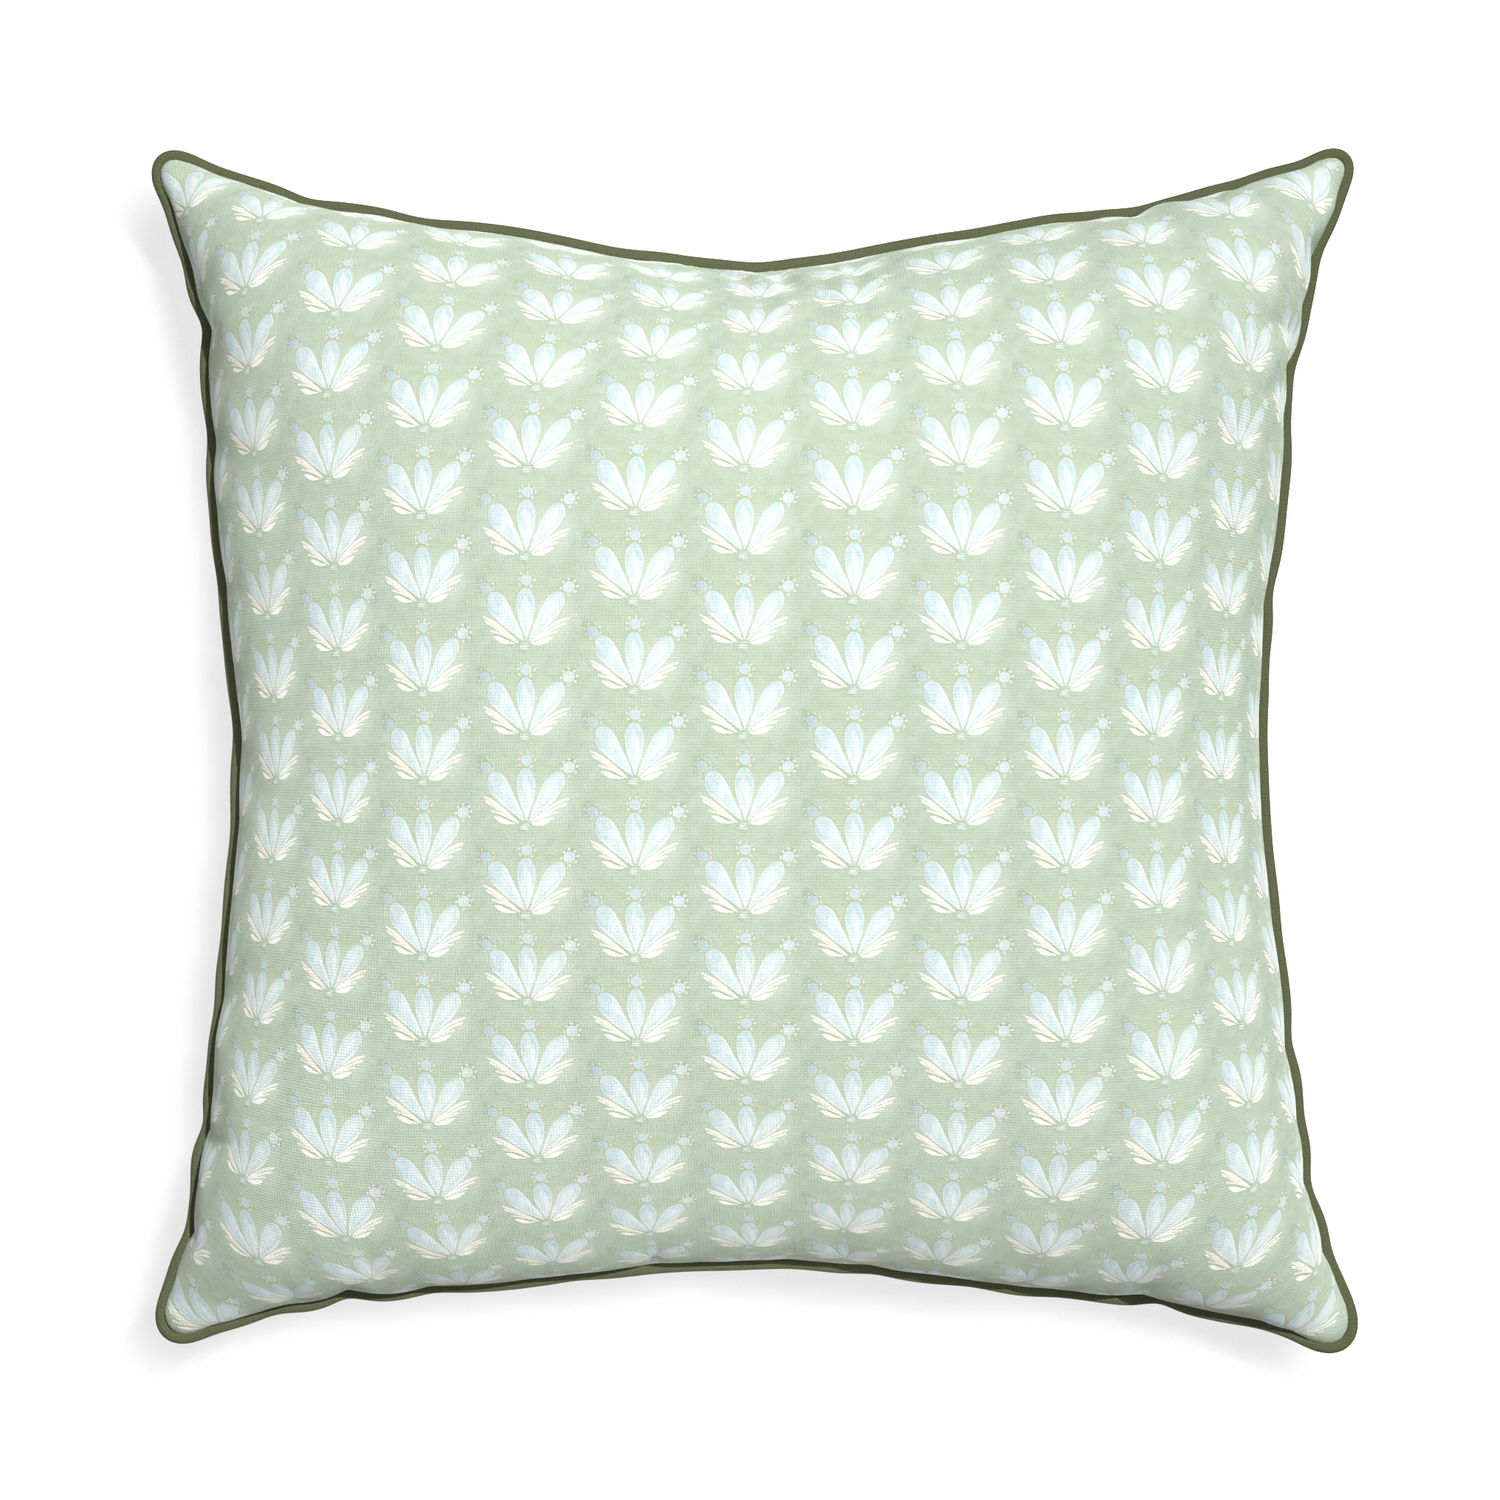 Euro-sham serena sea salt custom blue & green floral drop repeatpillow with f piping on white background